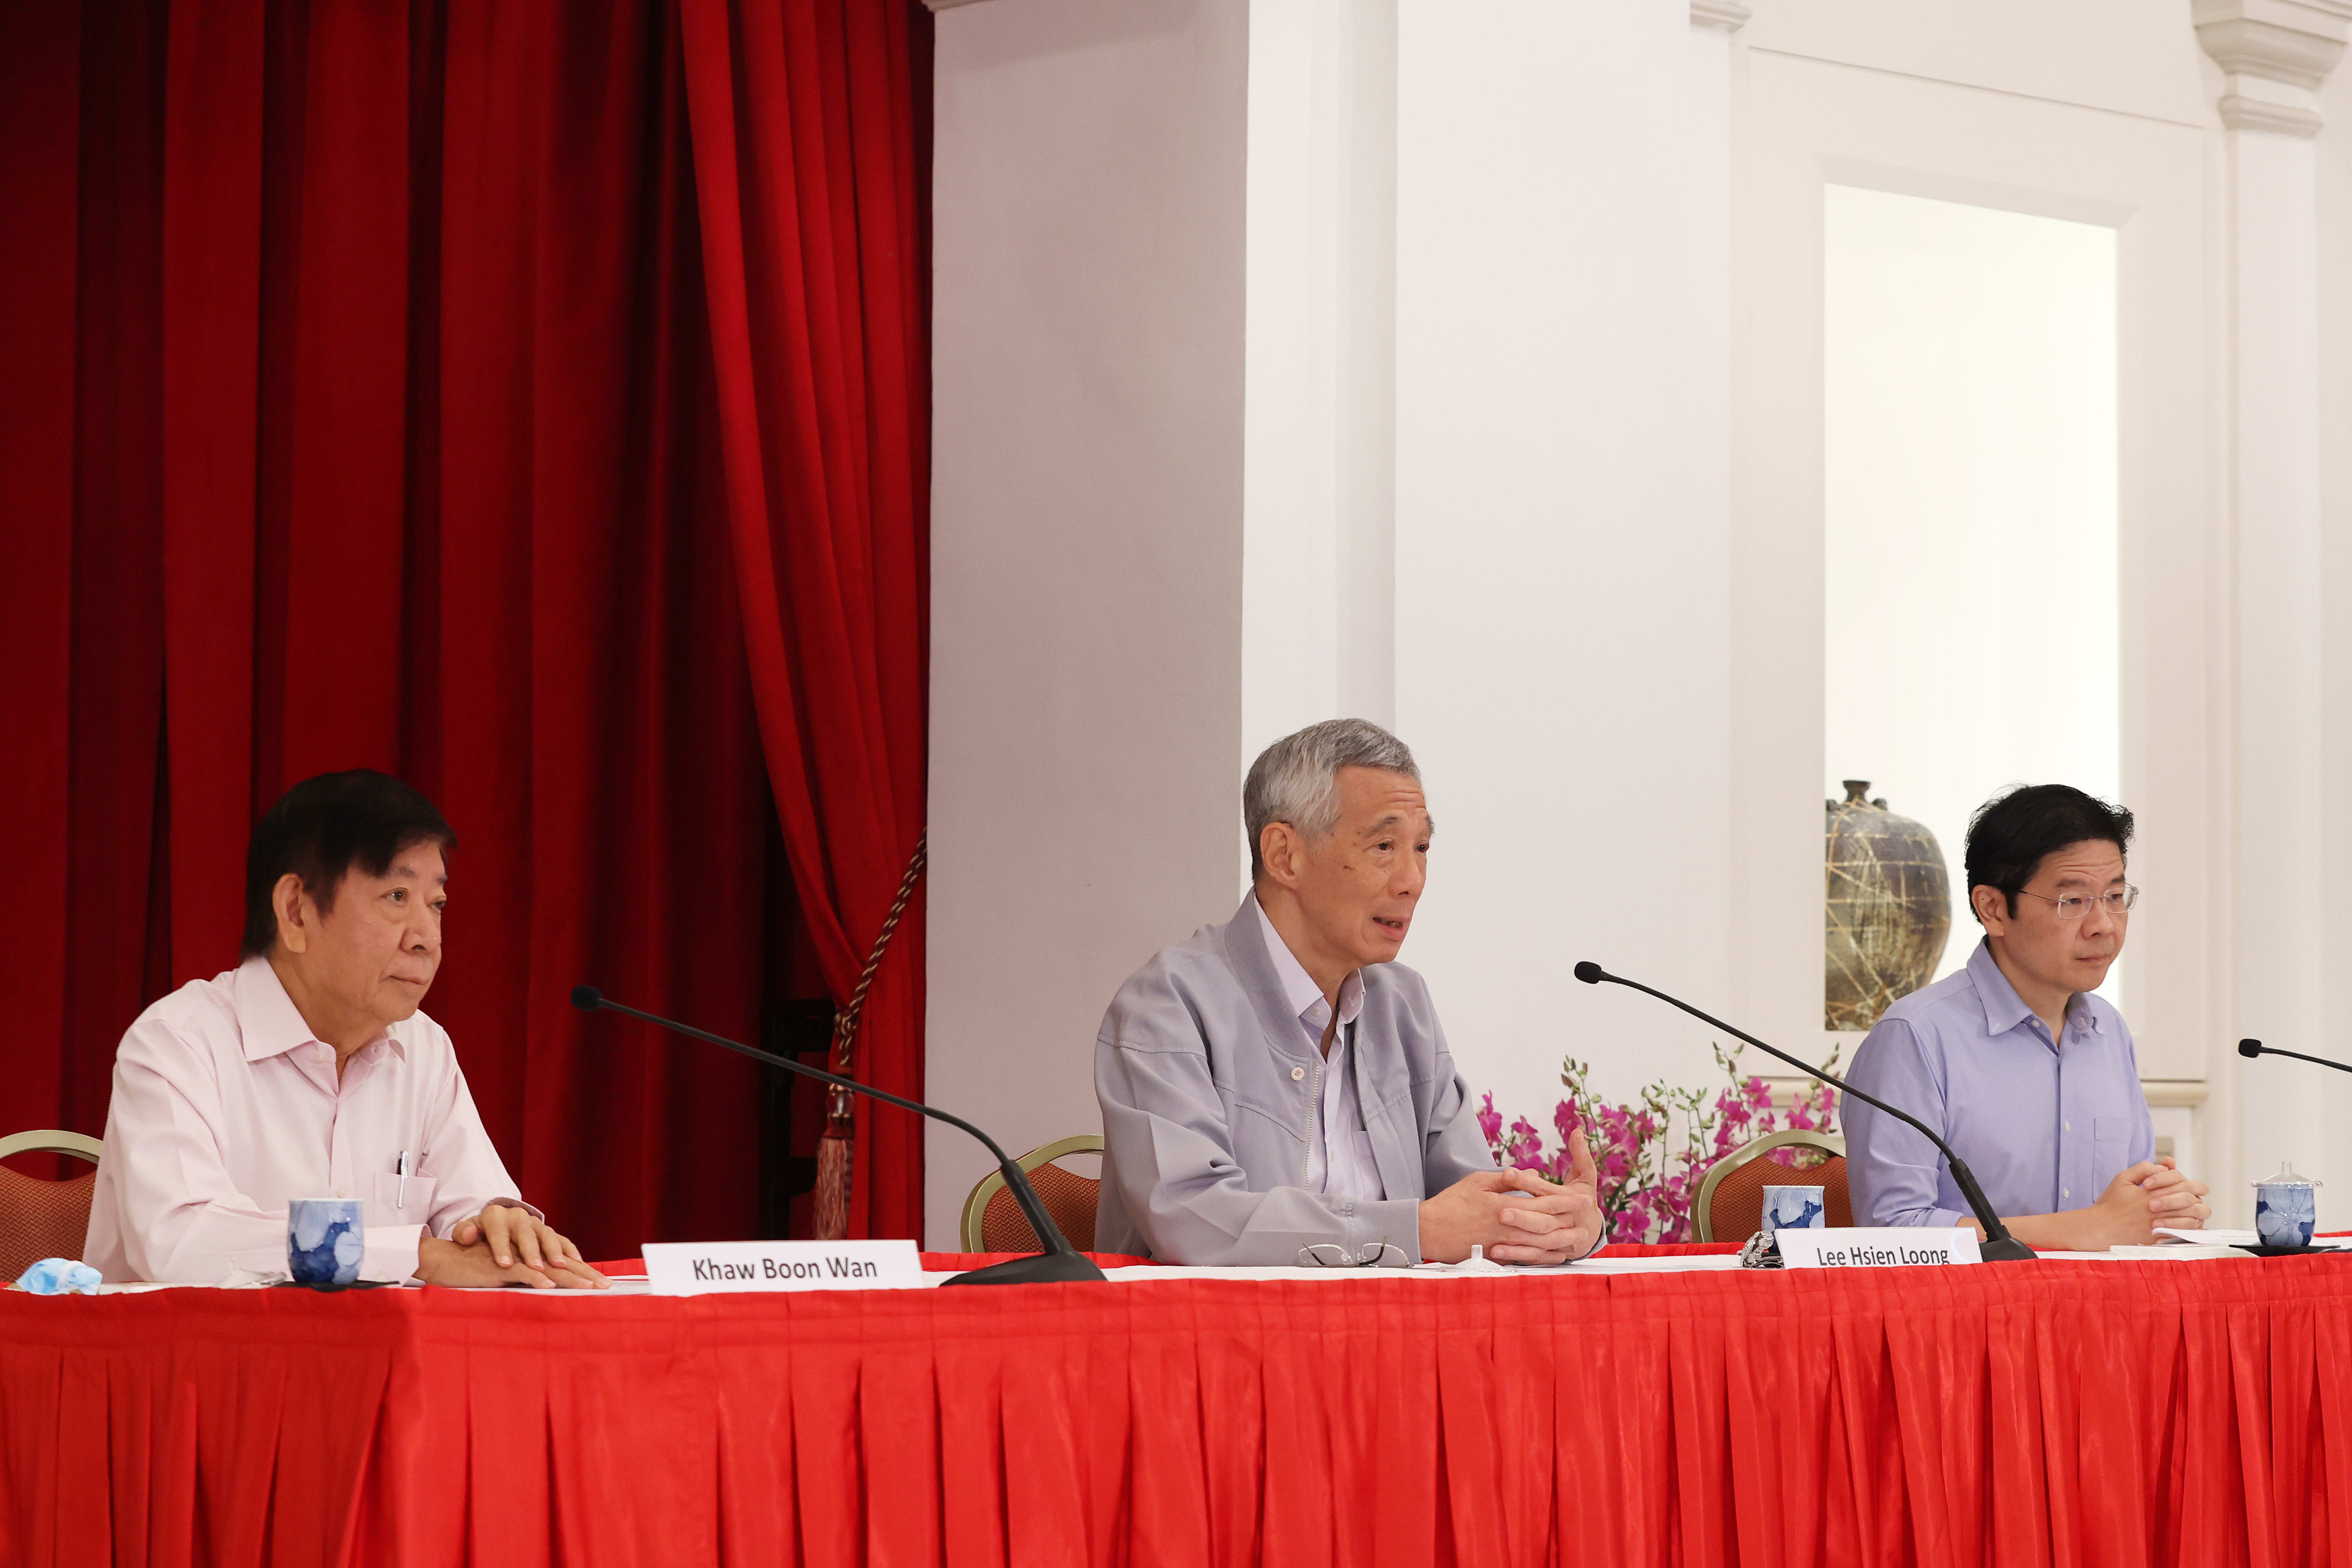 Prime Minister Lee Hsien Loong (centre) held a press conference together with former minister Khaw Boon Wan (left) and Finance Minister Lawrence Wong on April 16, 2022